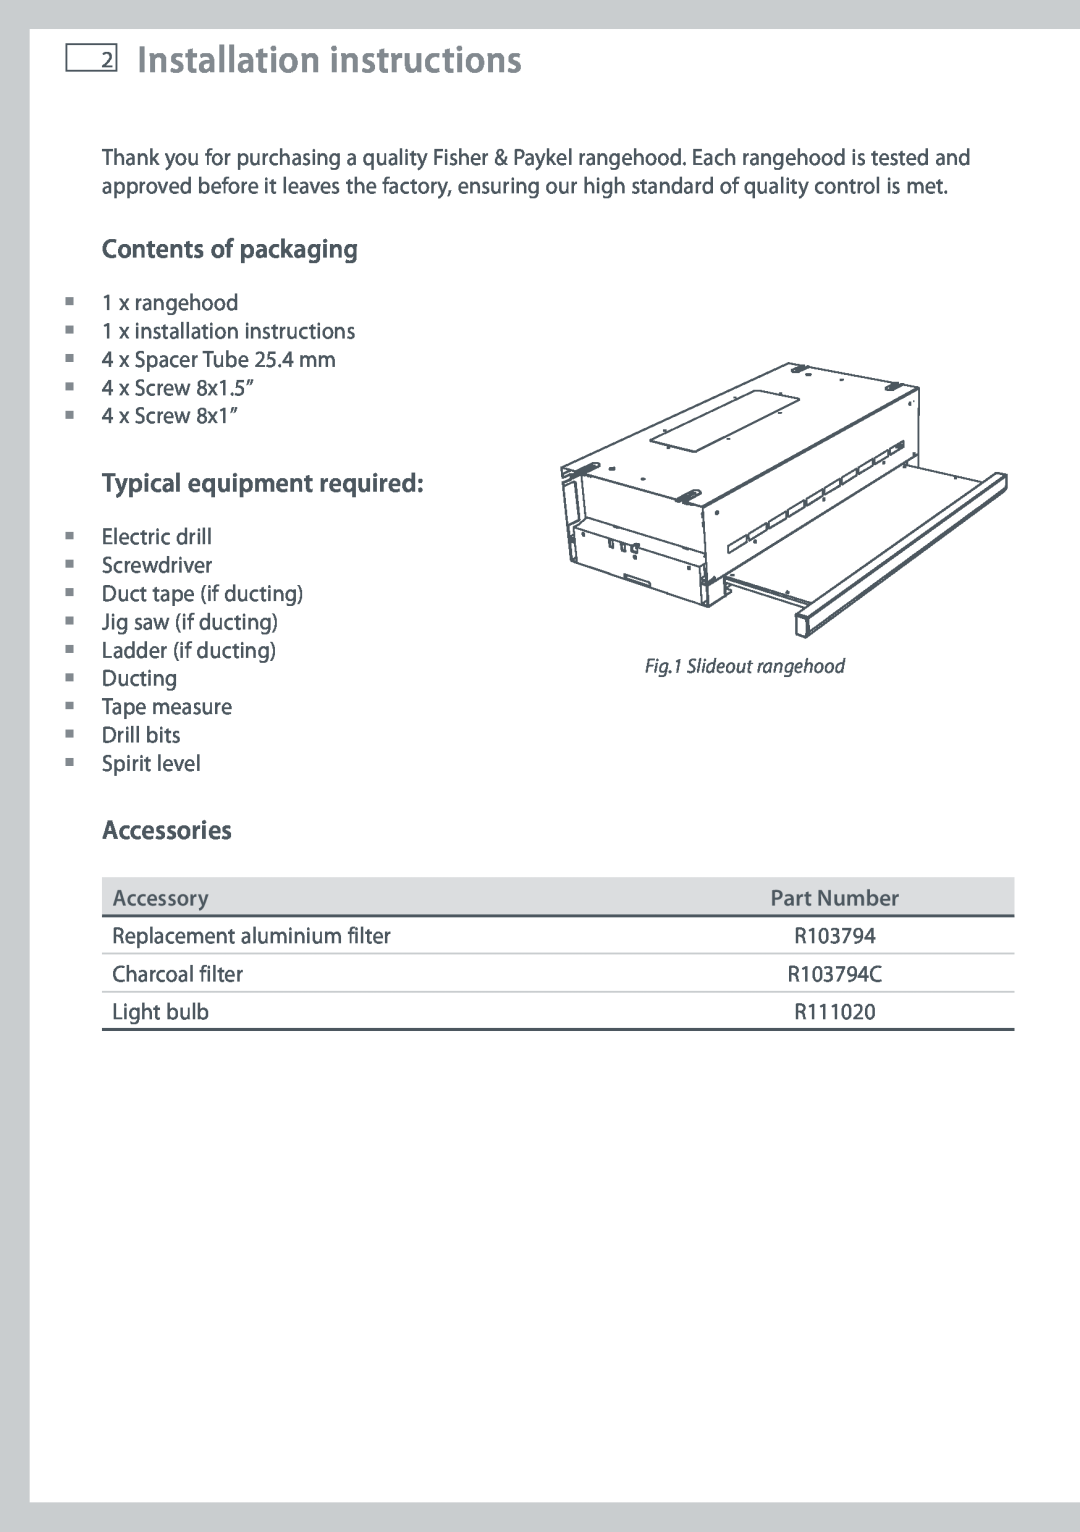 Fisher & Paykel HS60CSRX1 Installation instructions, Contents of packaging, Typical equipment required, Accessories 